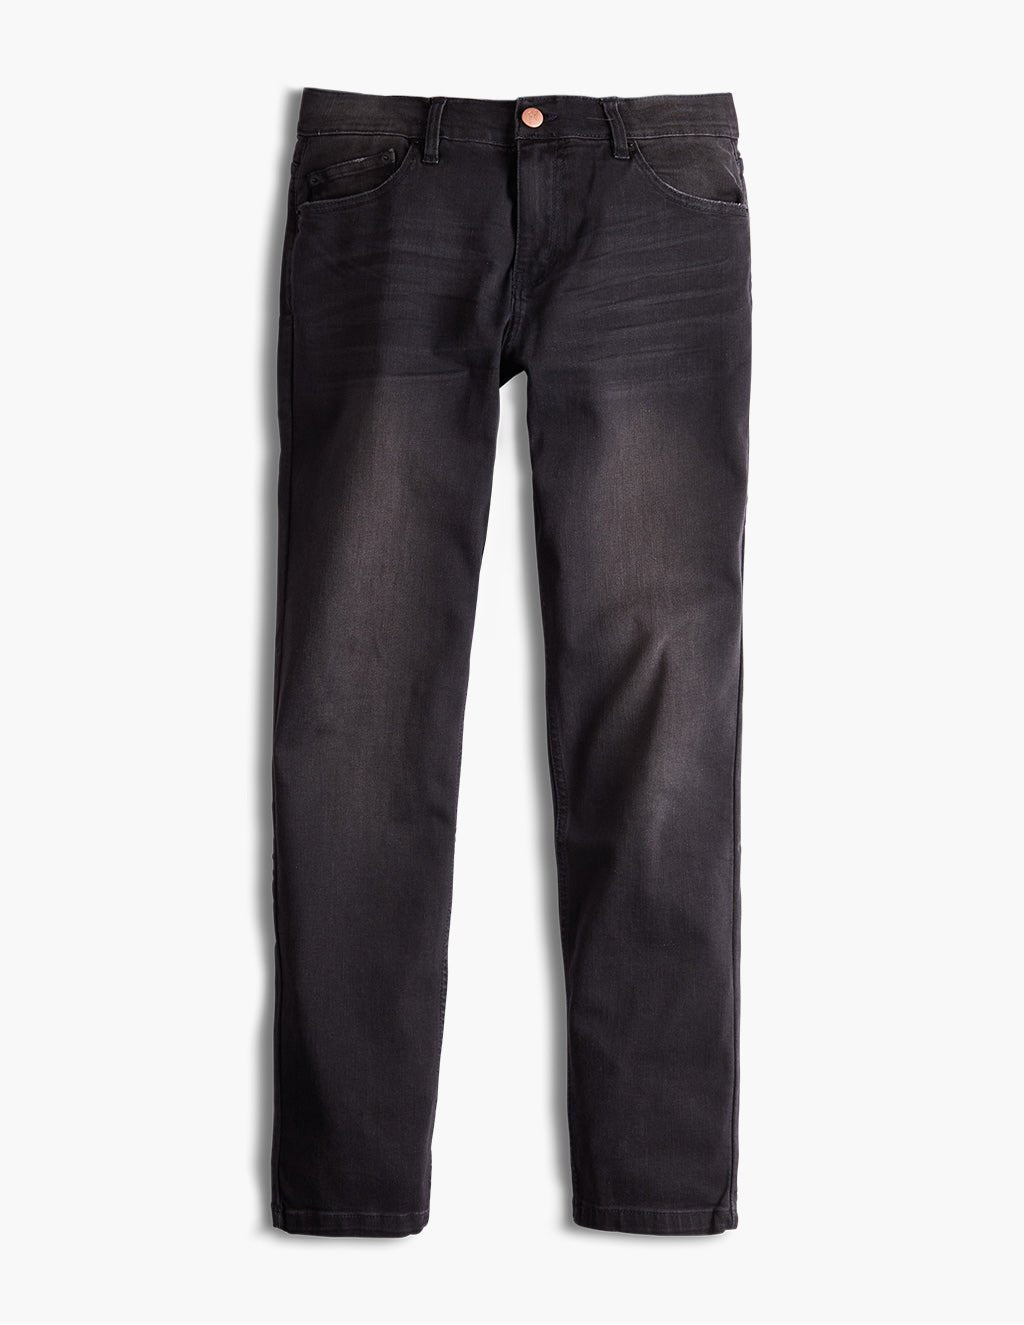 Men's Perfect Jeans (Buy 2 free shipping) mysite